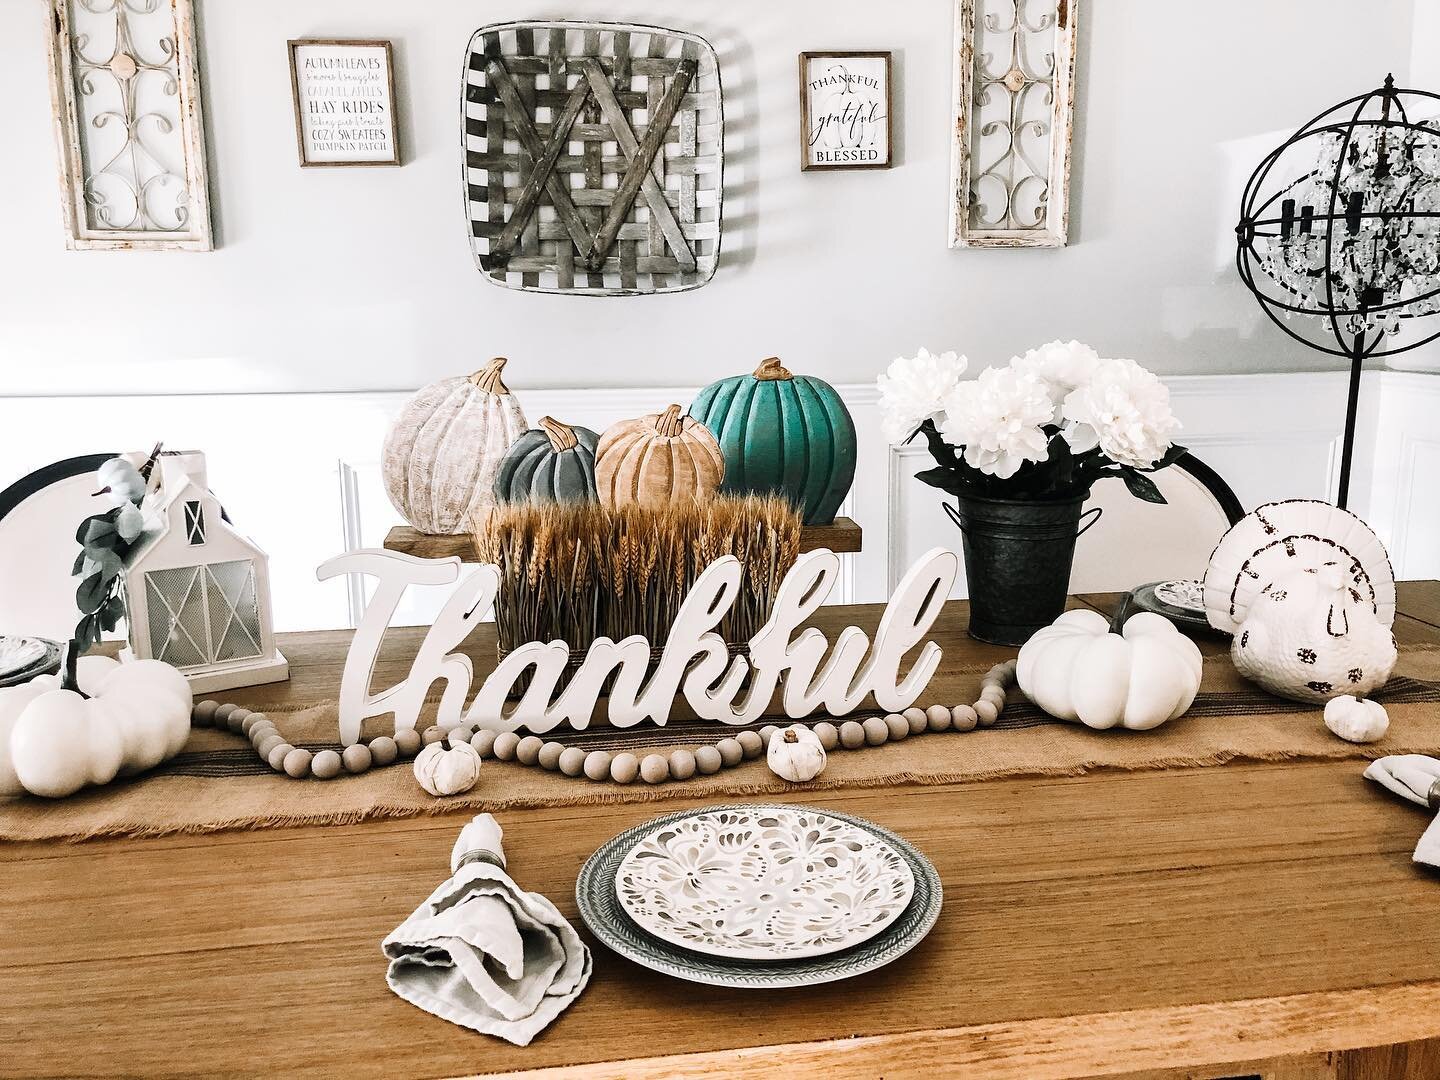 ✨T H A N K F U L✨⠀
⠀
Lil table inspiration for this fall like morning! 🍁 Simple with a little pop of color - my fave! ⠀
⠀
I&rsquo;m so thankful for all of you and my family ❤️ 2020 has definitely been a rollercoaster but there is positive around it.